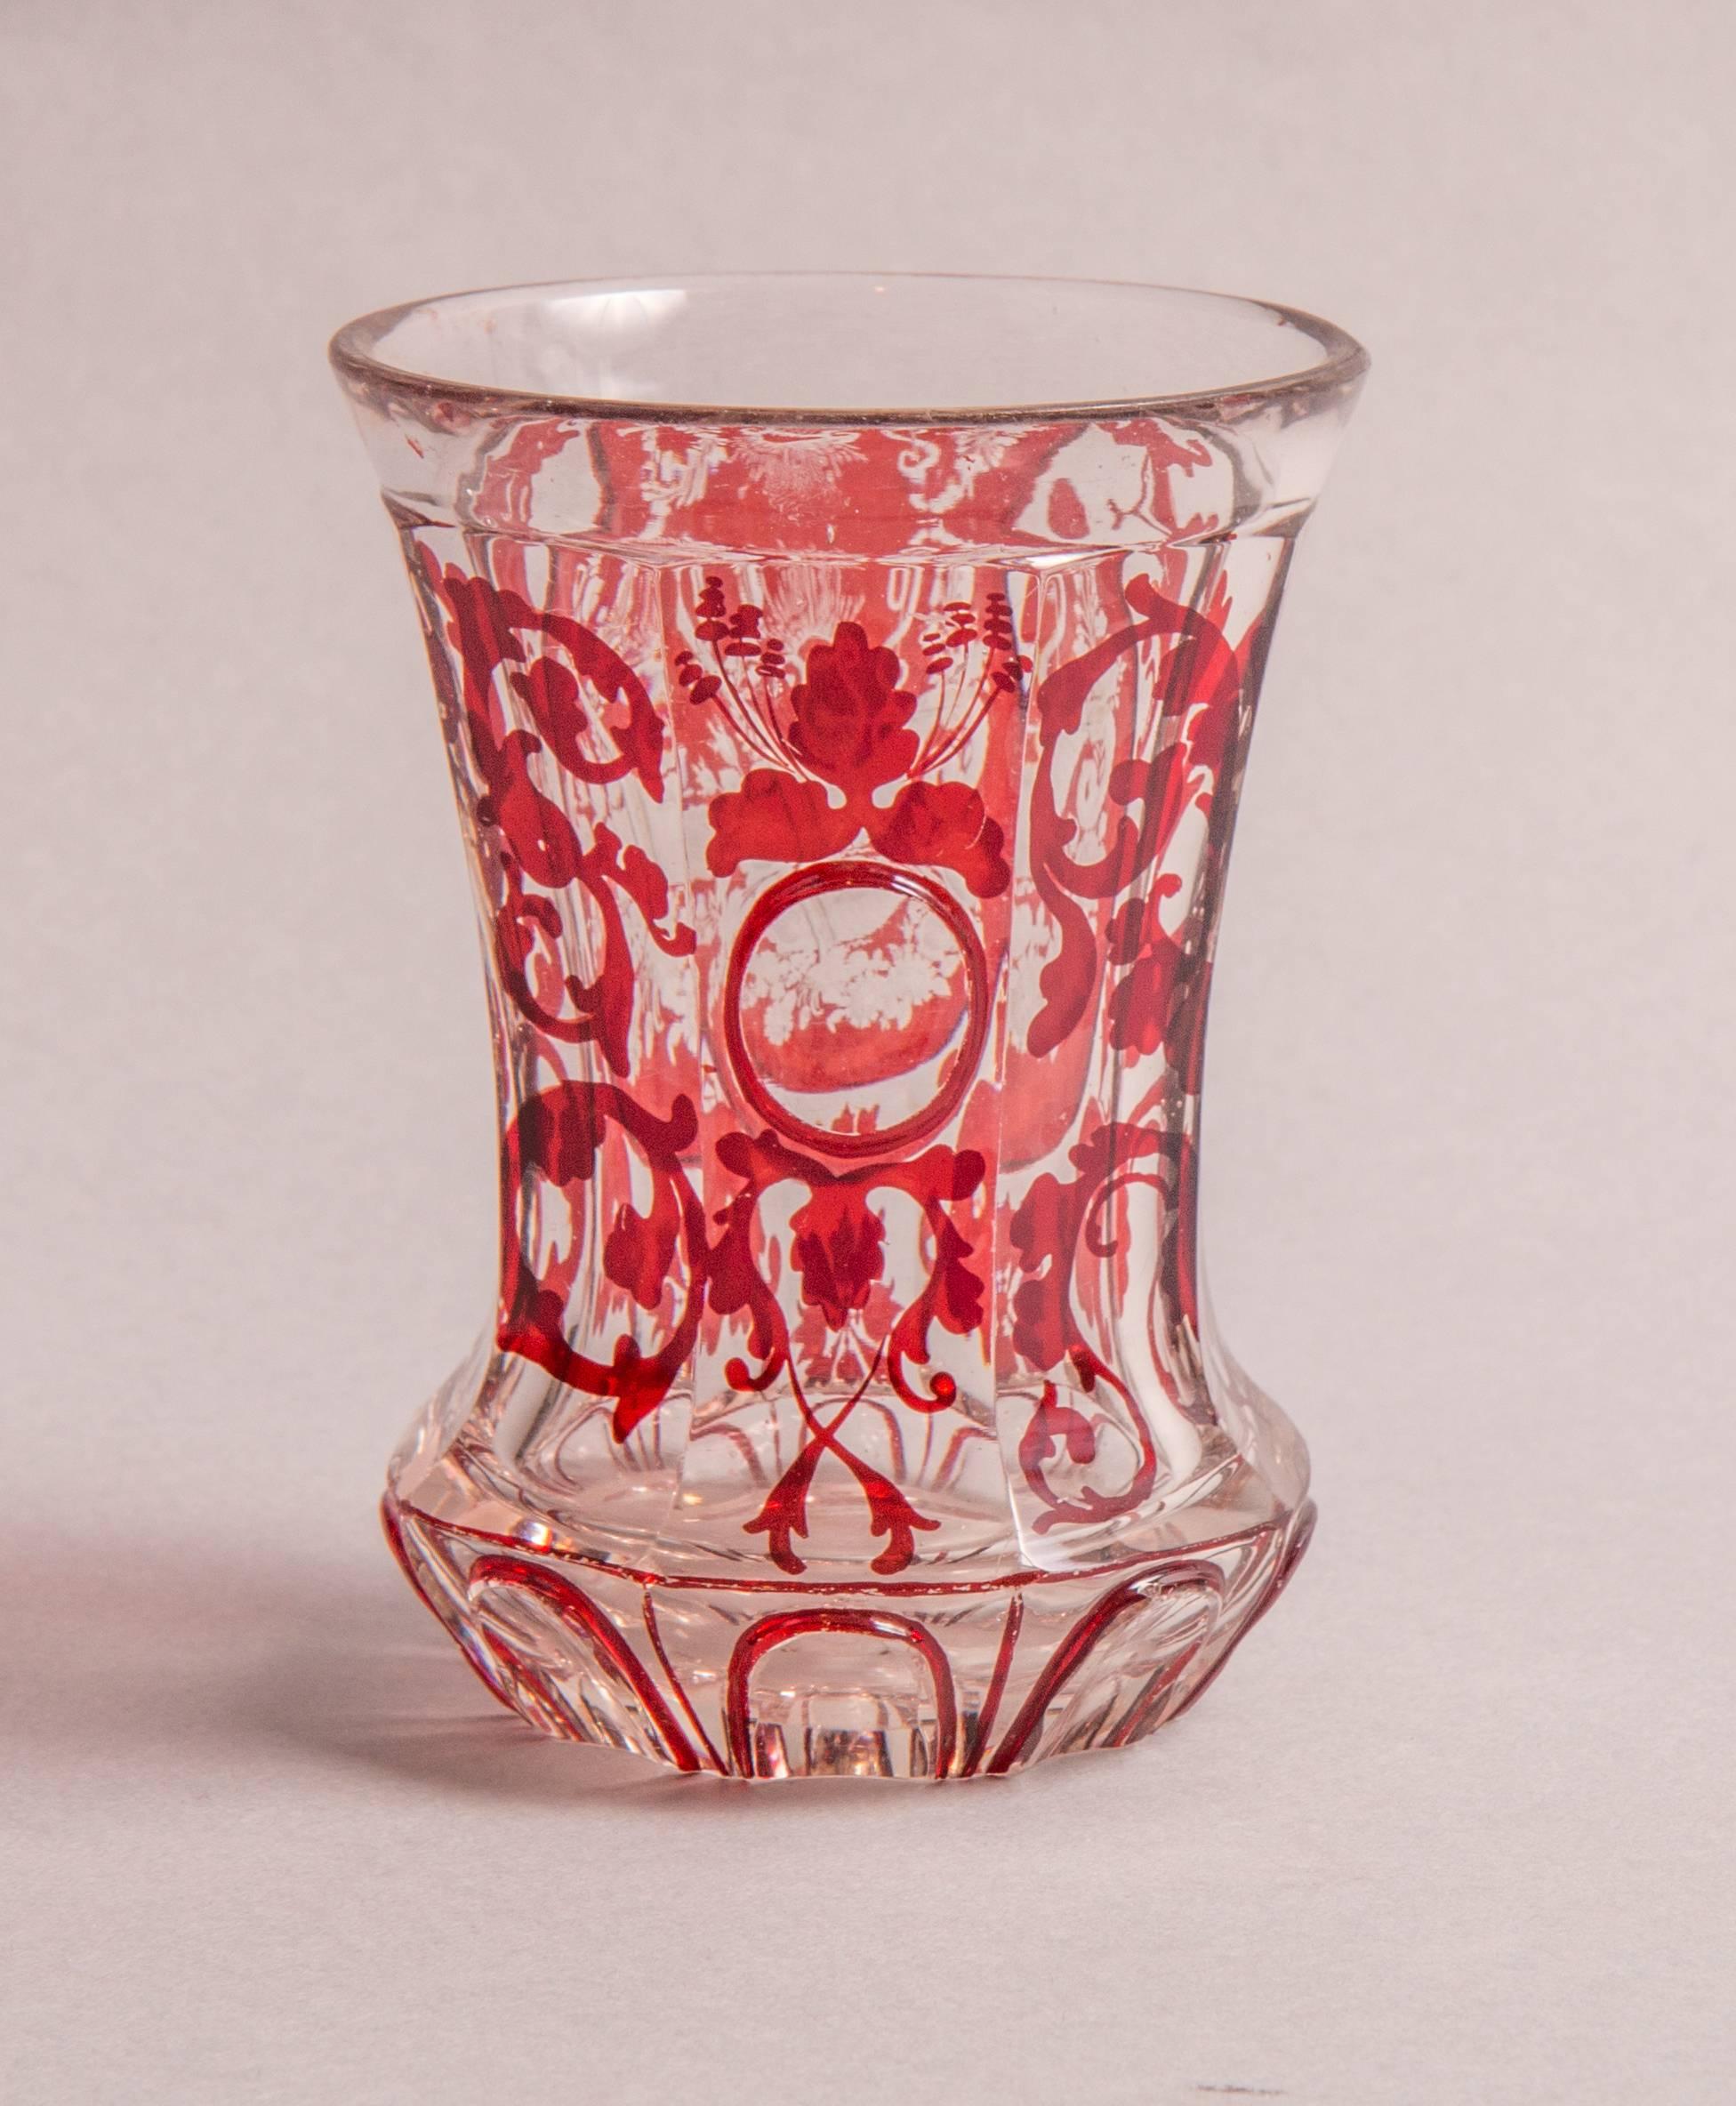 Bohemia, circa 1830-1850.
Clear glass, red enamel painting, stained medallion, cut cornucopia.